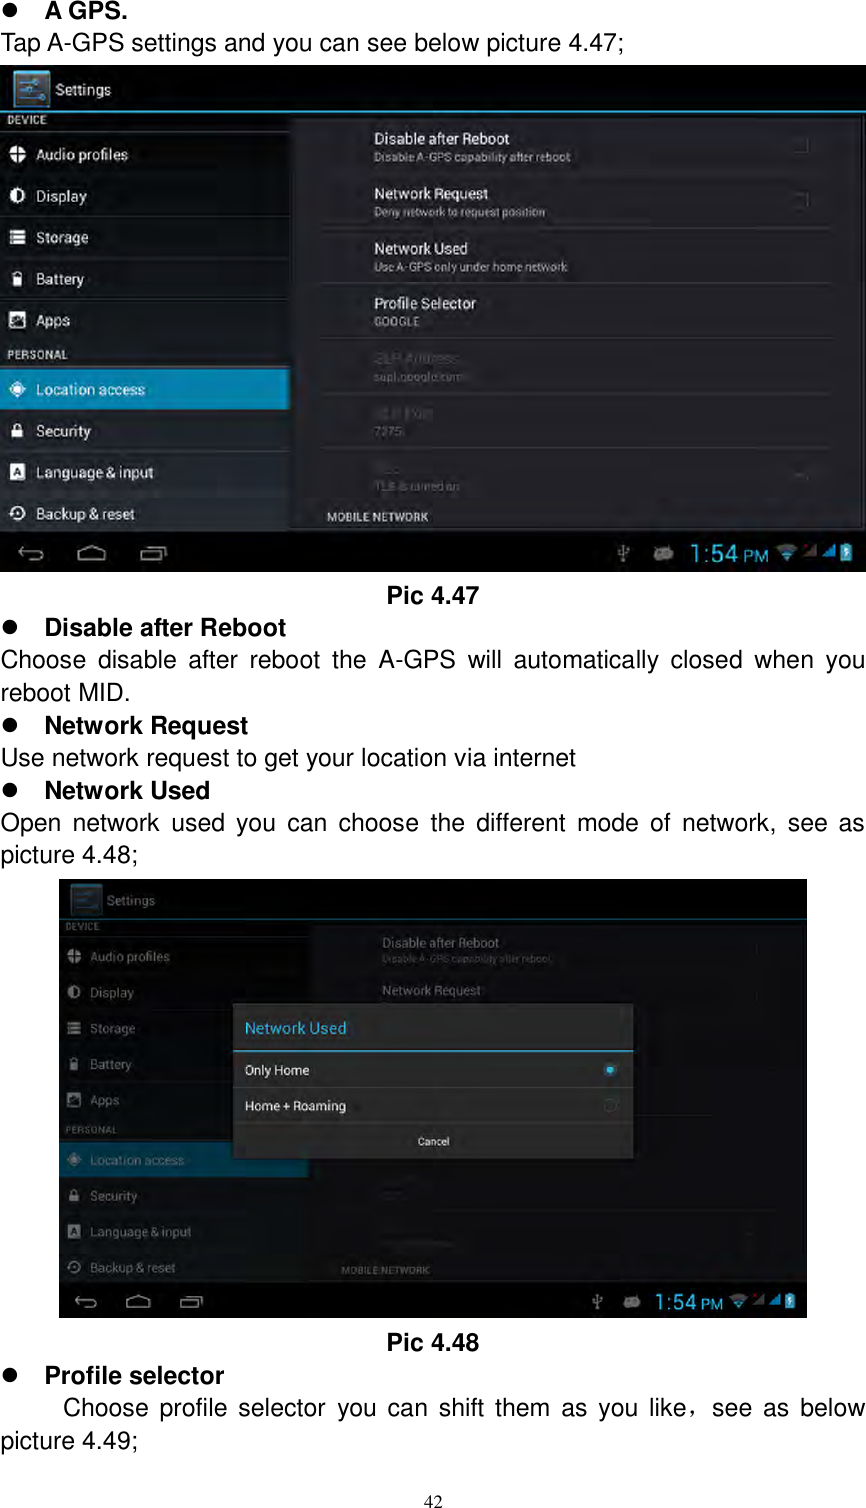      42  A GPS. Tap A-GPS settings and you can see below picture 4.47;  Pic 4.47  Disable after Reboot Choose  disable  after  reboot  the  A-GPS  will  automatically  closed  when  you reboot MID.  Network Request Use network request to get your location via internet  Network Used Open  network  used  you  can  choose  the  different  mode of  network,  see  as picture 4.48;  Pic 4.48  Profile selector       Choose profile selector  you can  shift  them  as you like，see as below picture 4.49; 